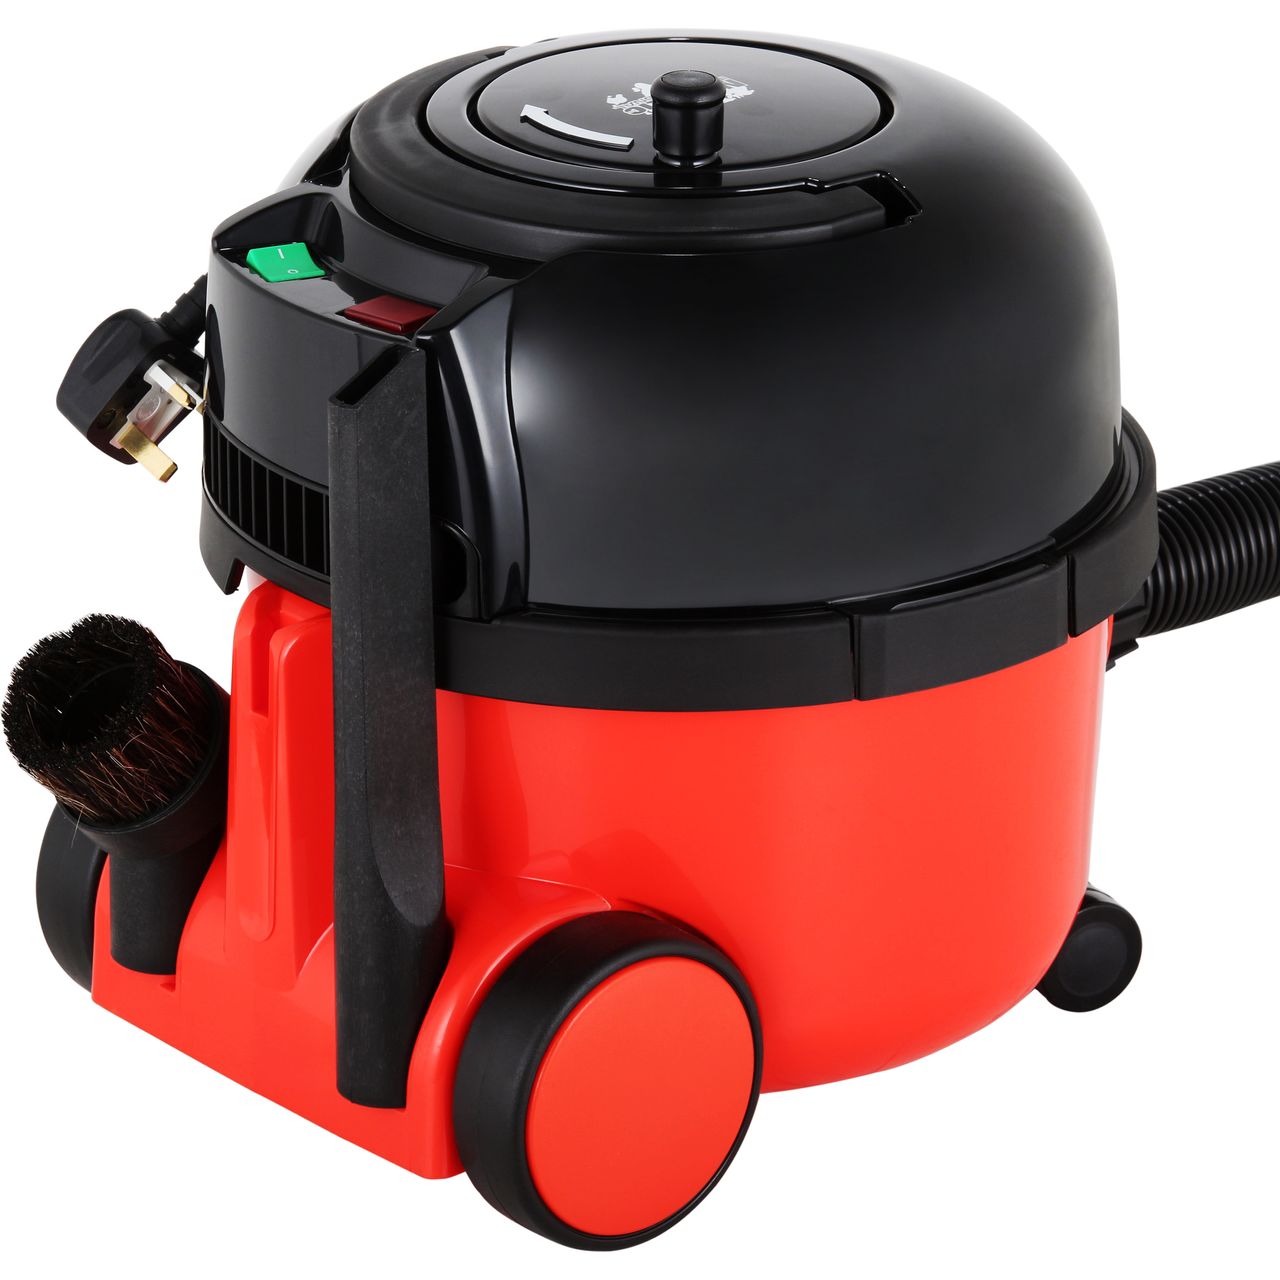 Henry HVR 200-11 Bagged Cylinder Vacuum, 620 W, 9 Litres, Red, Black/Red,  TV & Home Appliances, Vacuum Cleaner & Housekeeping on Carousell